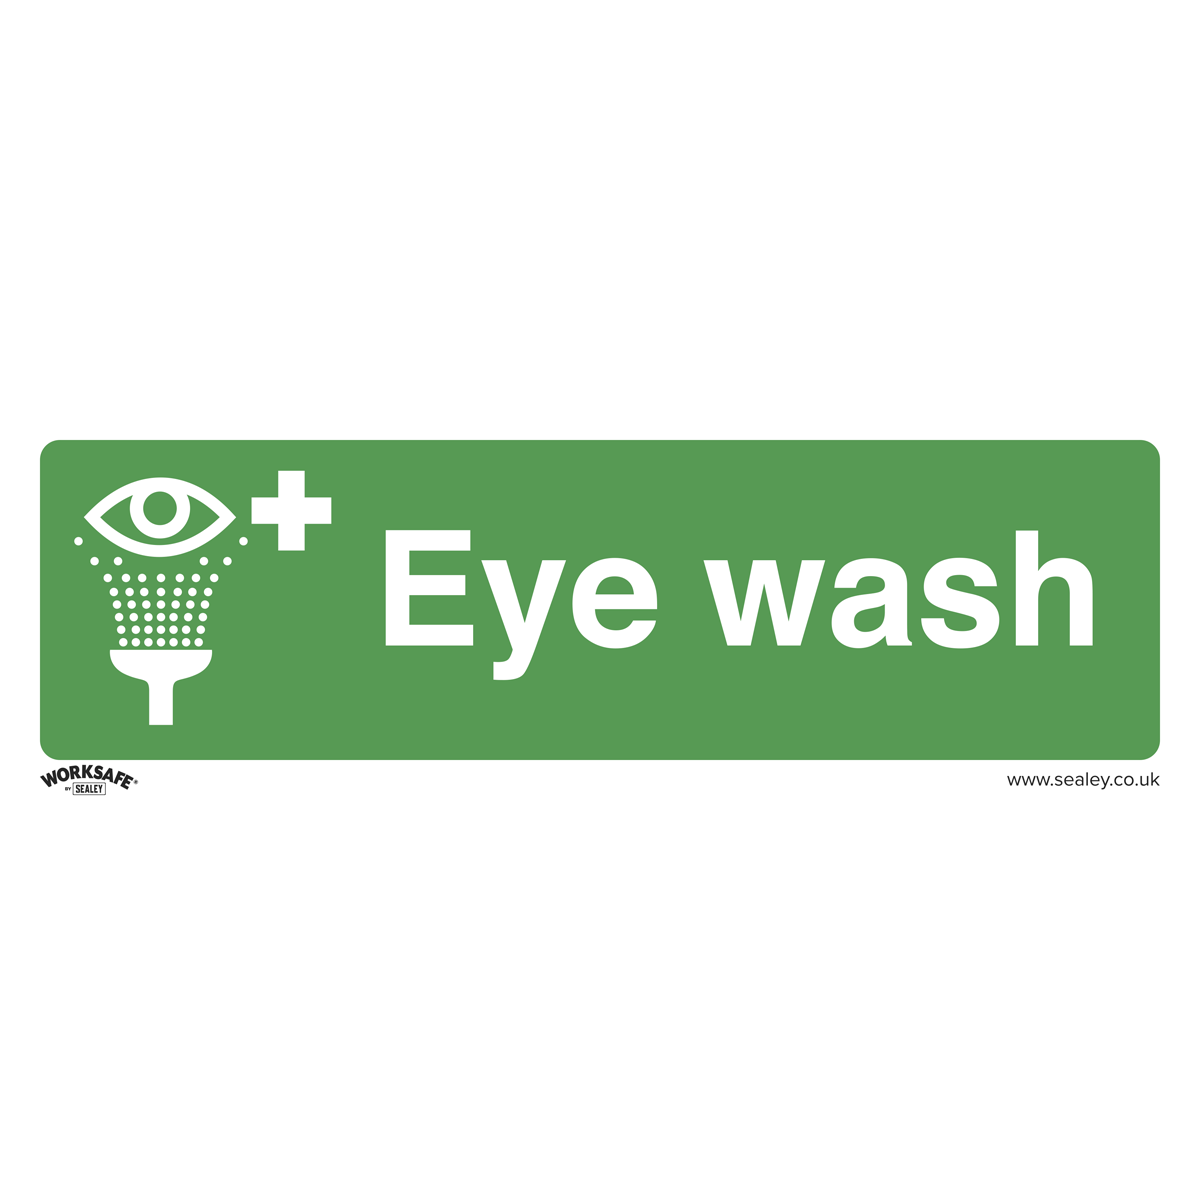 Safe Conditions Safety Sign - Eye Wash - Self-Adhesive Vinyl - Pack of 10 - SS58V10 - Farming Parts